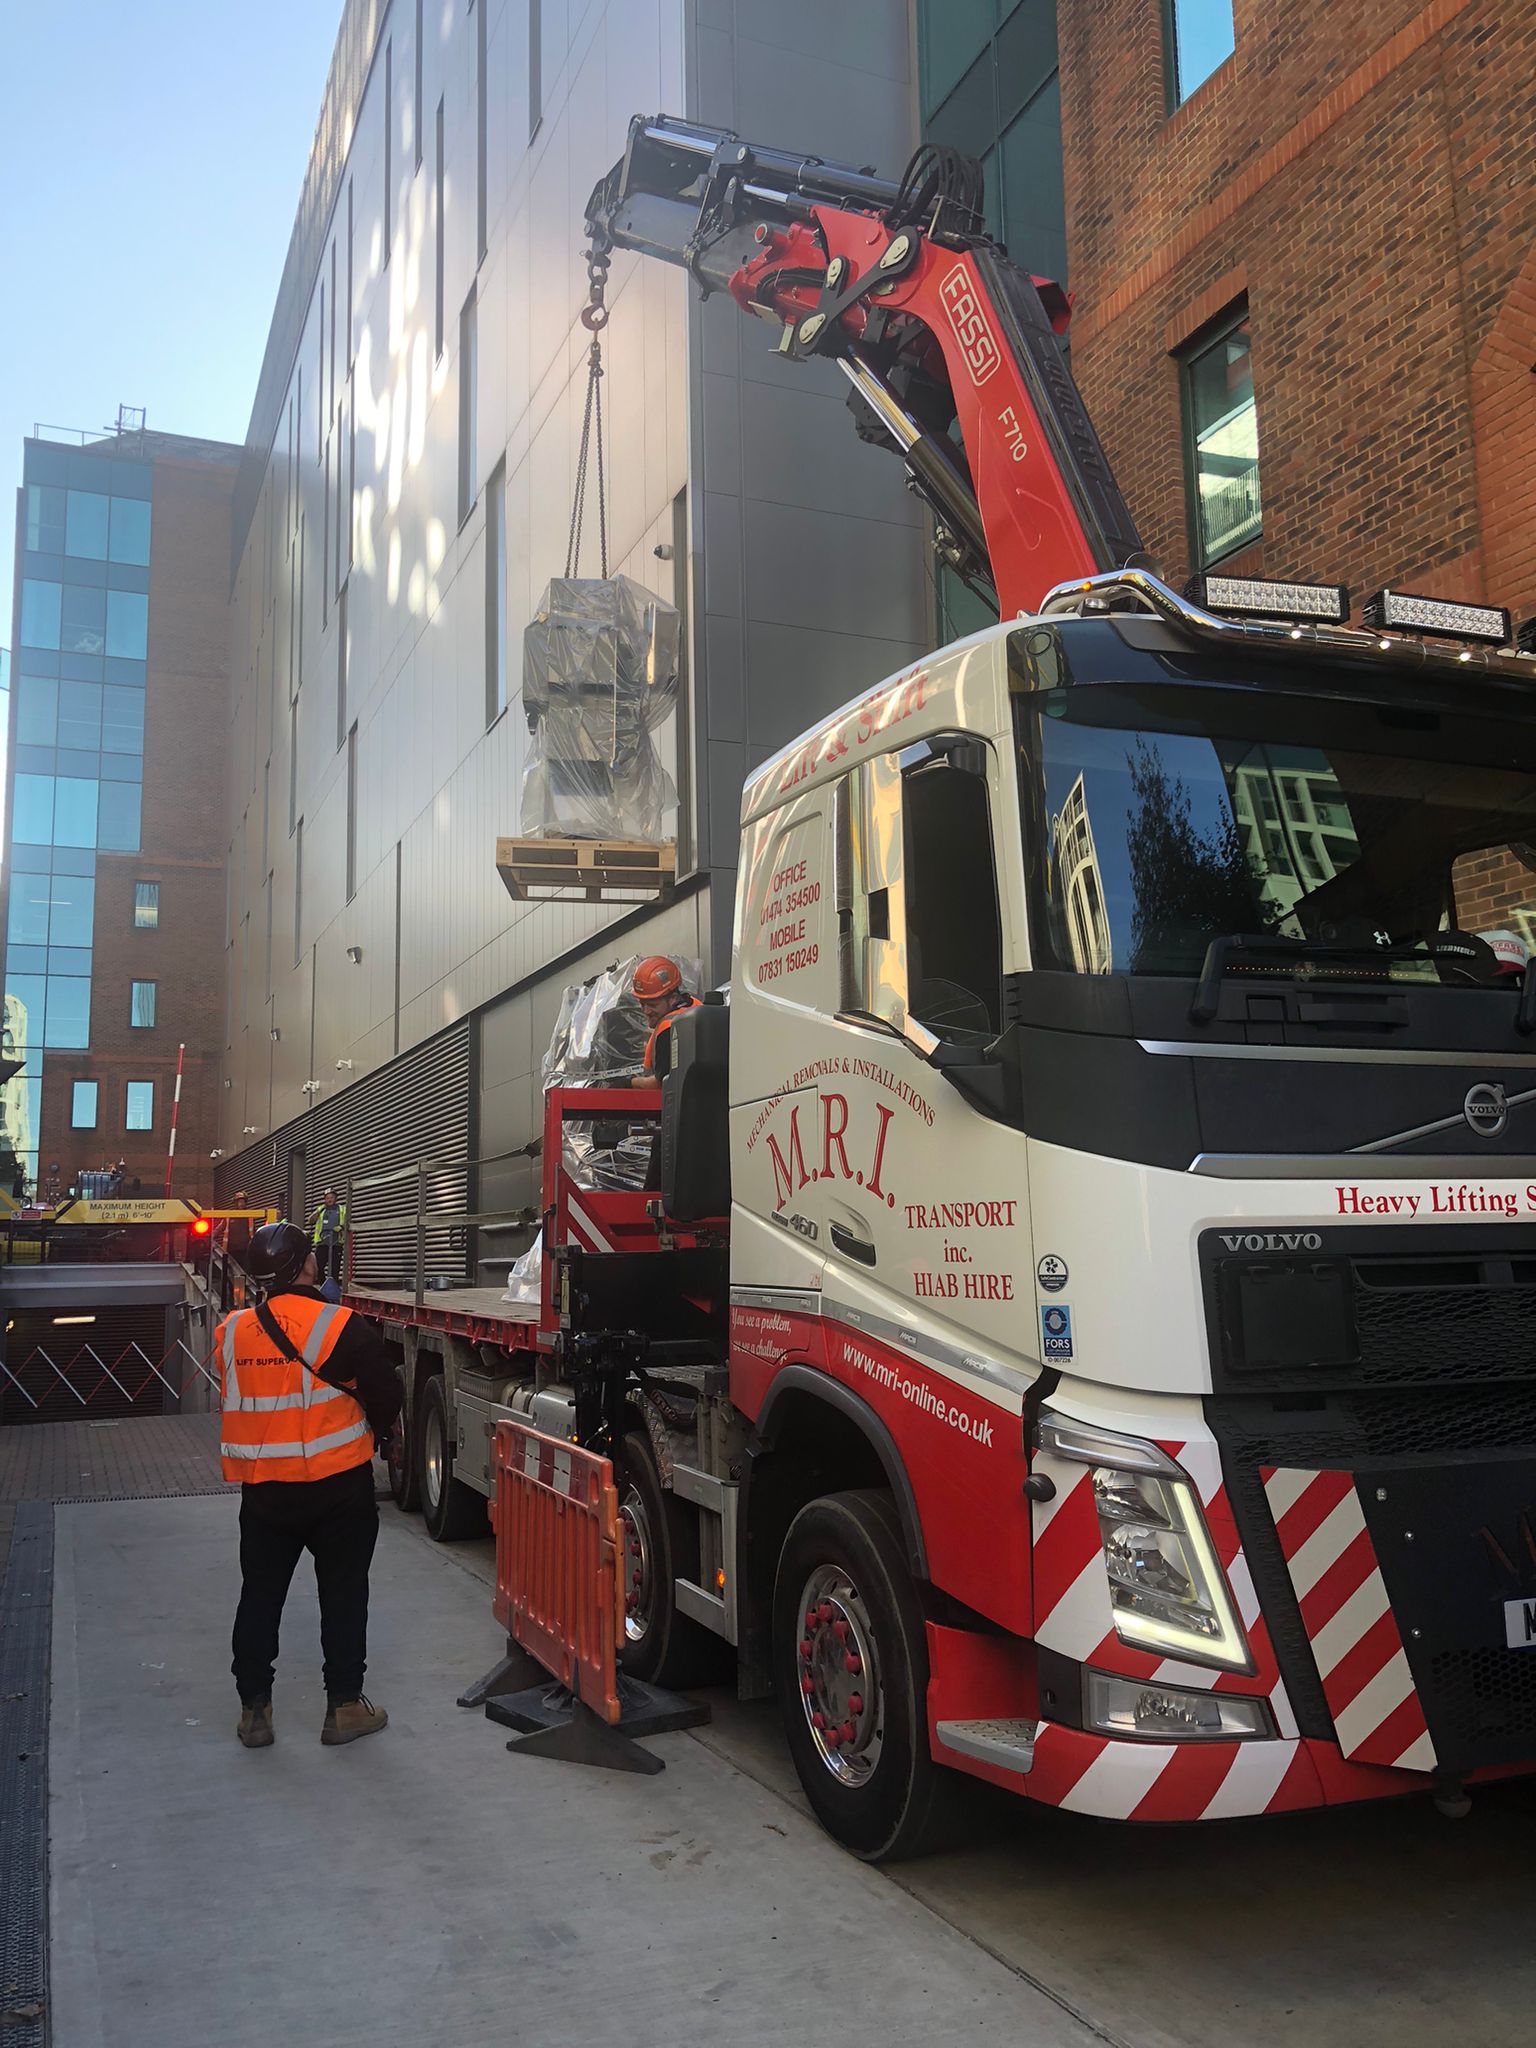 Mechanical, Electrical, Plant, Movement, Removals, Installations, Machinery, Lorry, HGV, LGV, Lowloader, RORO, Roll, Hookloader, Skip, Generator, Chiller, AHU, Trailer, Drawbar, Crane, Lifts, Lifting, Moving, Skate, Strop, Flatbed, MRI, Cranage, Craneage, Transport, Storage, Waste, Disposal, Heavy, Awkward, Stripout, Mats, Haulage, Delivery, Machinery Movement, Electrical Movement, Plant Movement, Mechanical Removals, Mechanical Installations, Electrical Removals, Electrical Installations, Machinery Movement, Machinery Removals, Machinery Installations, Mechanical Movements, Crane Lift, Crane Lifting, Lorry Hire, HGV Hire, LGV Hire, Crane Hire, Transport Hire, Mat Hire, Crane Mats, Removals and Installations, Mechanical and Electrical, Heavy and Awkward, Contract Crane Lift, Cranage Contract Lift, Mechanical Removals and Installations, Electrical Removals and Installations, Plant Removals and Installations, Heavy and Awkward Installations, Heavy and Awkward Removals, Heavy and Awkward Plant, Heavy and Awkward Movement, Storage, Fabrication, Props, Underpropping, Forklift, MRI London, Plant Movements, CHP, Heavy Movement, Hiab Hire, Plant Removals, Crane Mat Hire, Awkward and Heavy, Lifting and Movement, General Haulage, Transport and Storage, Waste Disposal, Mechanical and Electrical, Machinery, Stripping Out, Stripout and Removals, We Use Muscles Too,